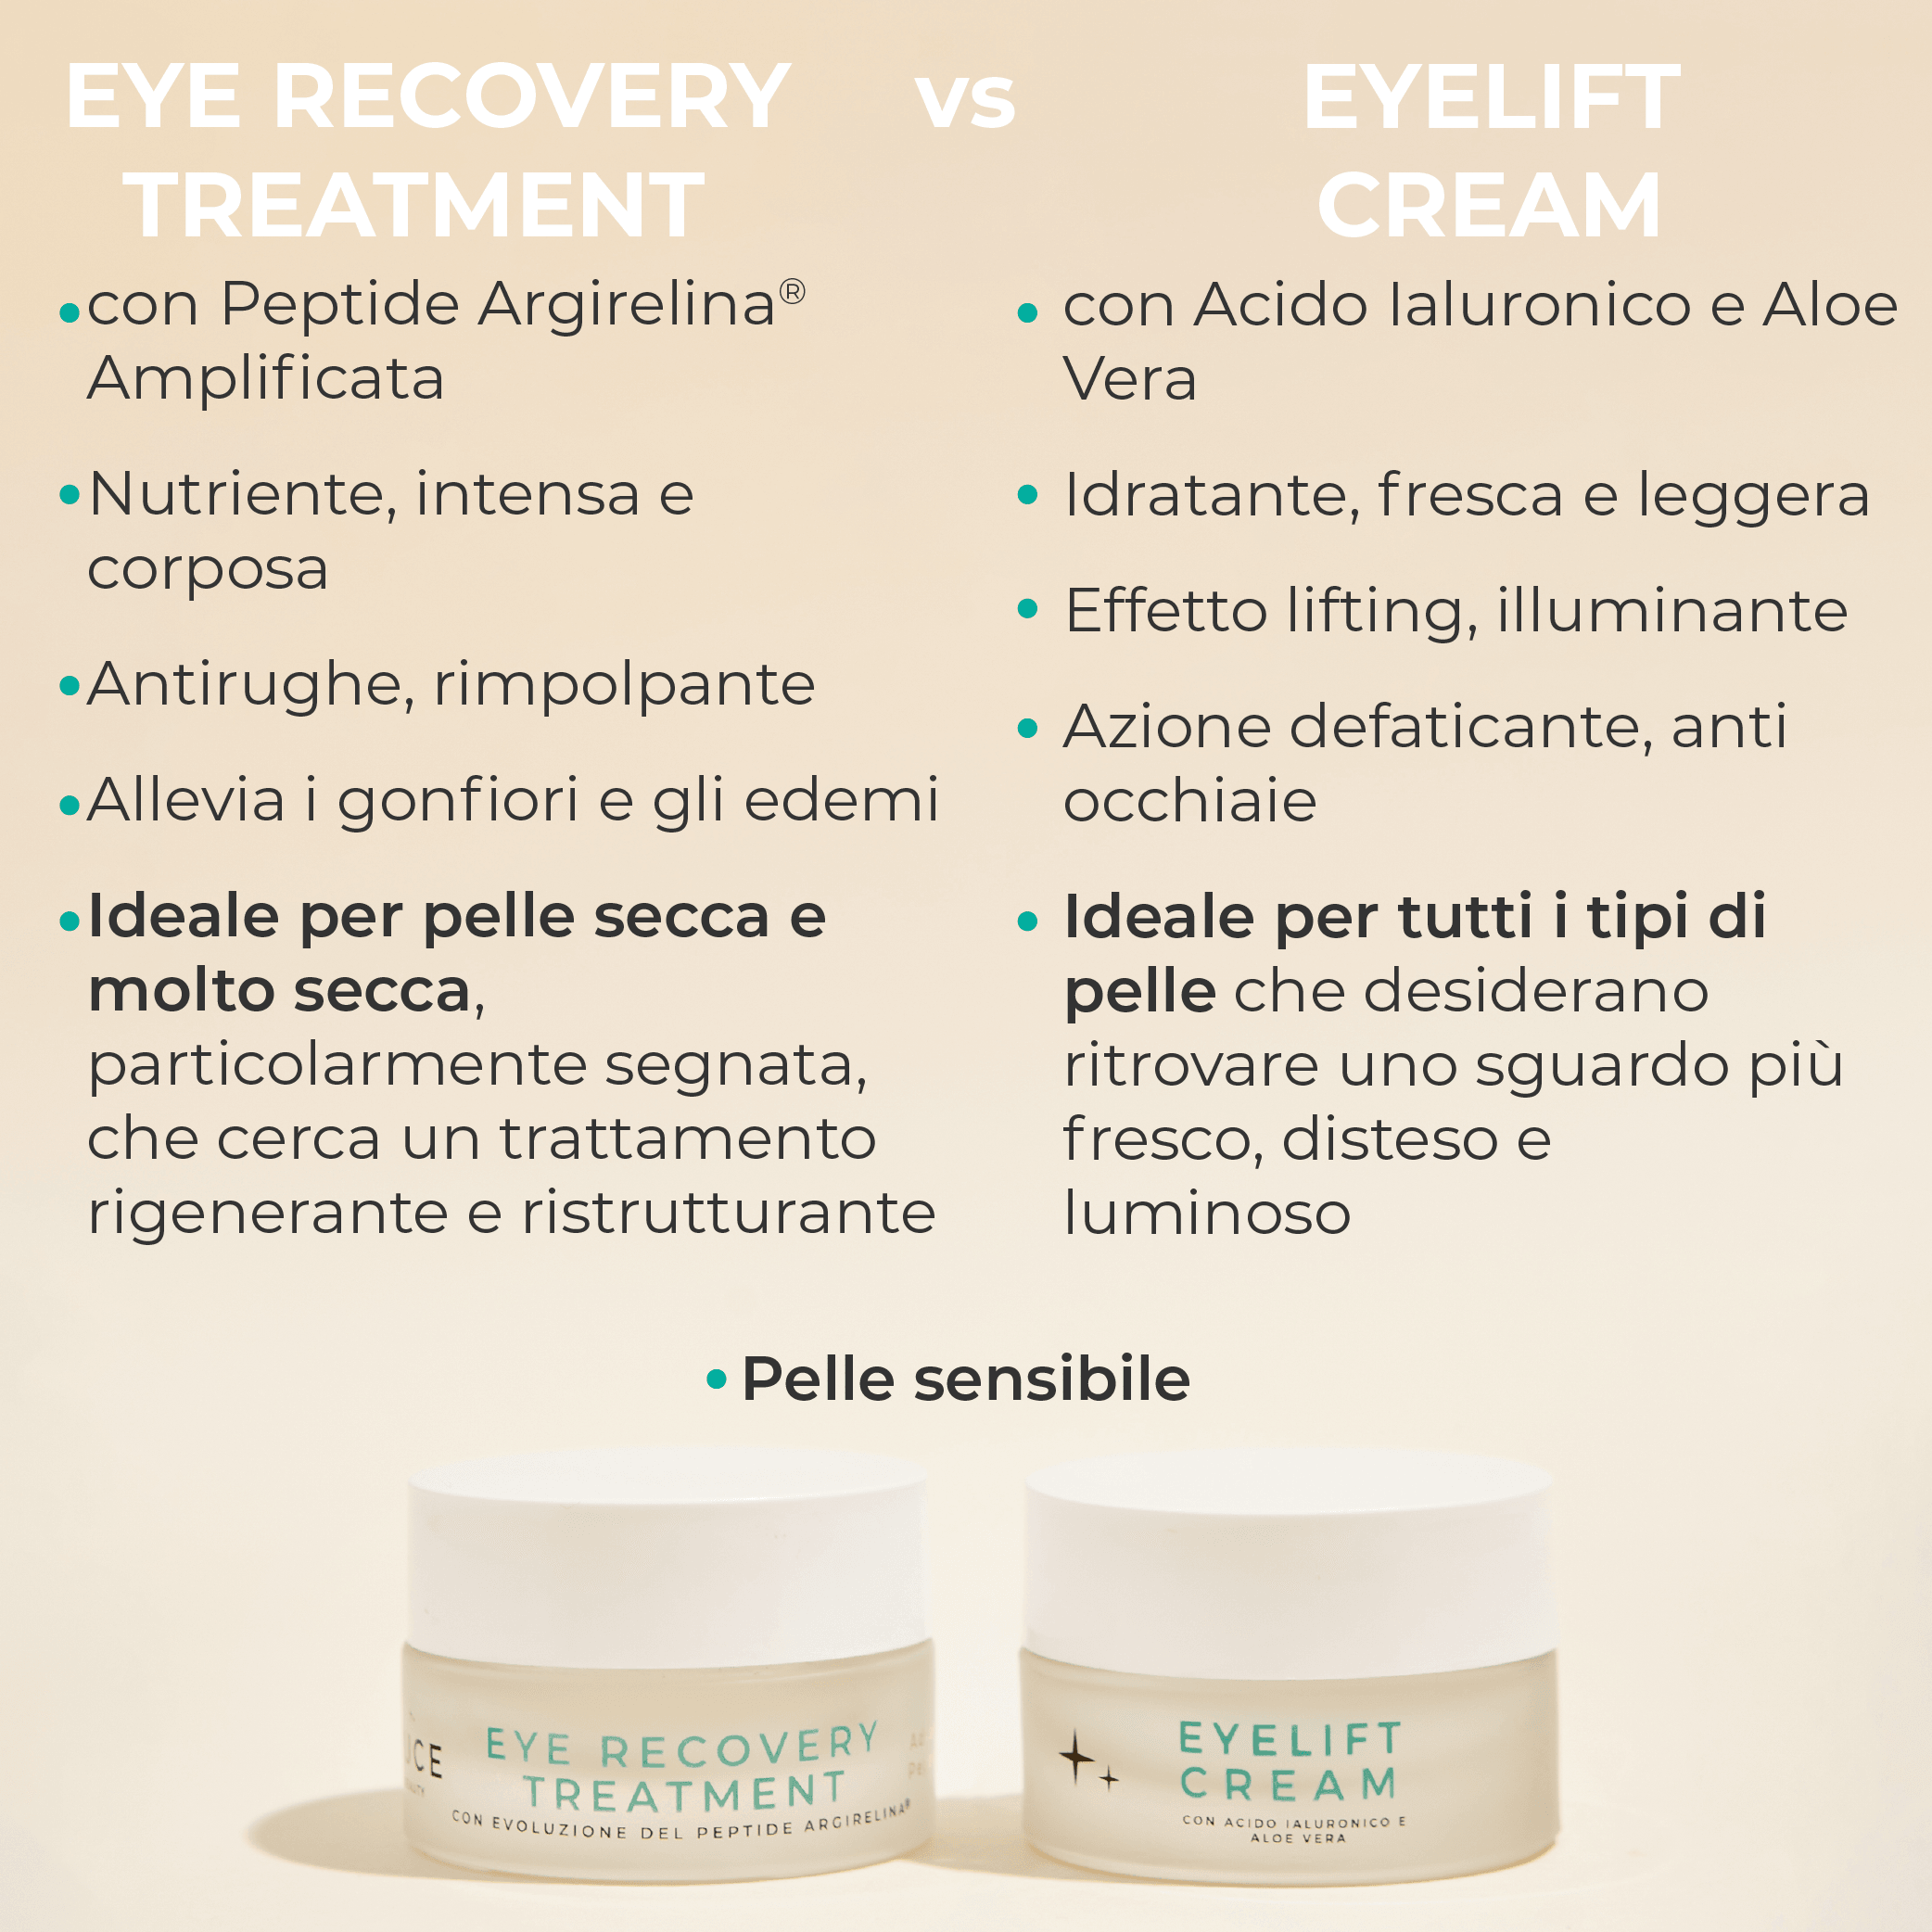 Eyelift_Cream_Eye recovery treatment - confronto crema contorno occhi - Luce Beauty By Alessia Marcuzzi